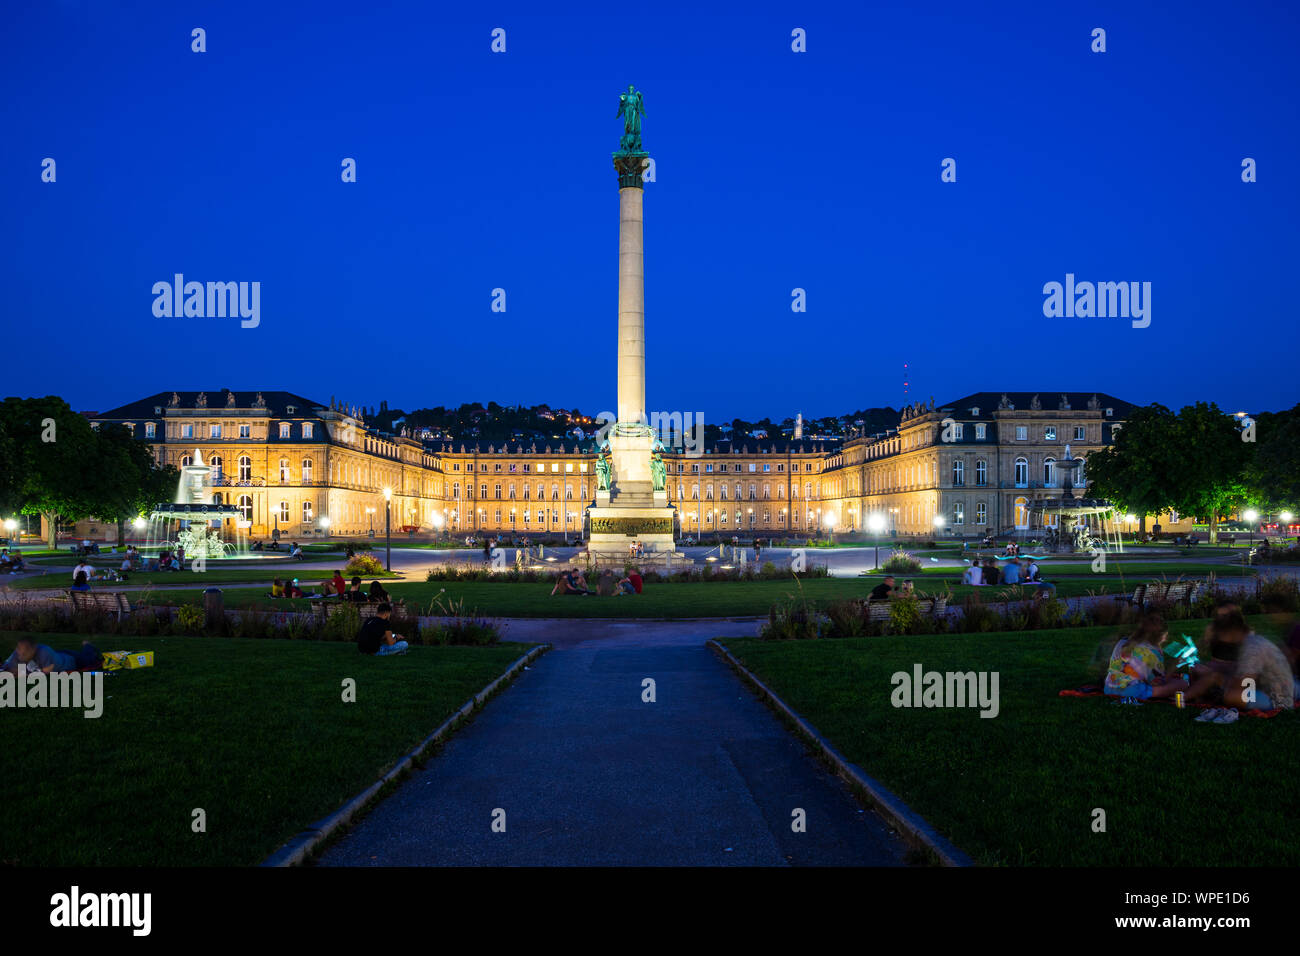 Stuttgart, Germany, August 25, 2019, Magical summer atmosphere at illuminated schlossplatz square by night after sunset with blue sky with many people Stock Photo